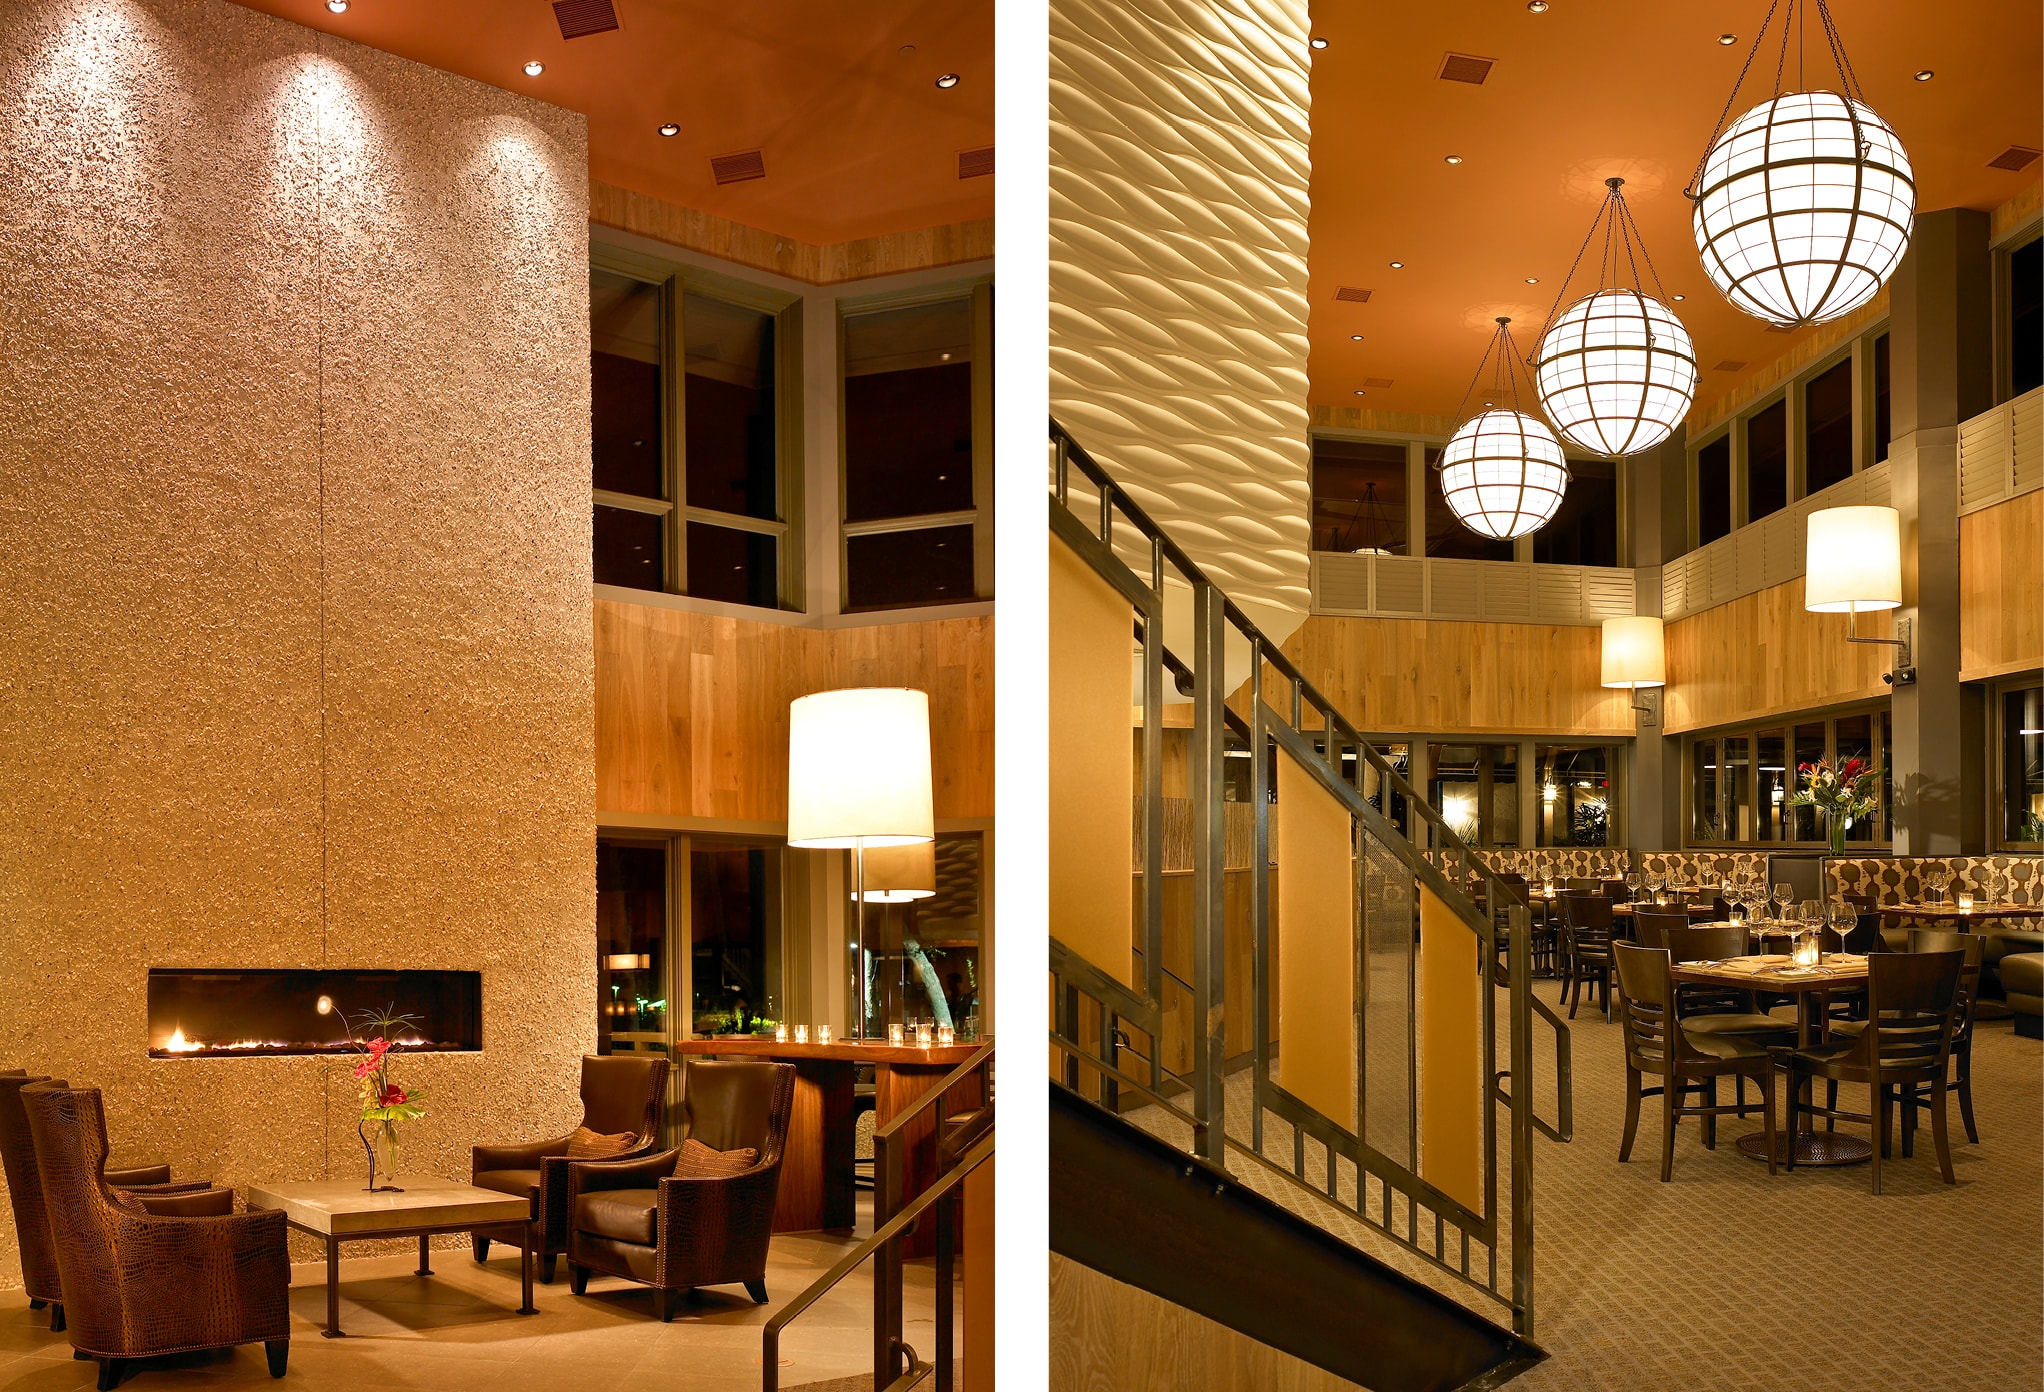 hh prime vignettes in the hilton head restaurant illustrate the warmth created by j banks design interior designers